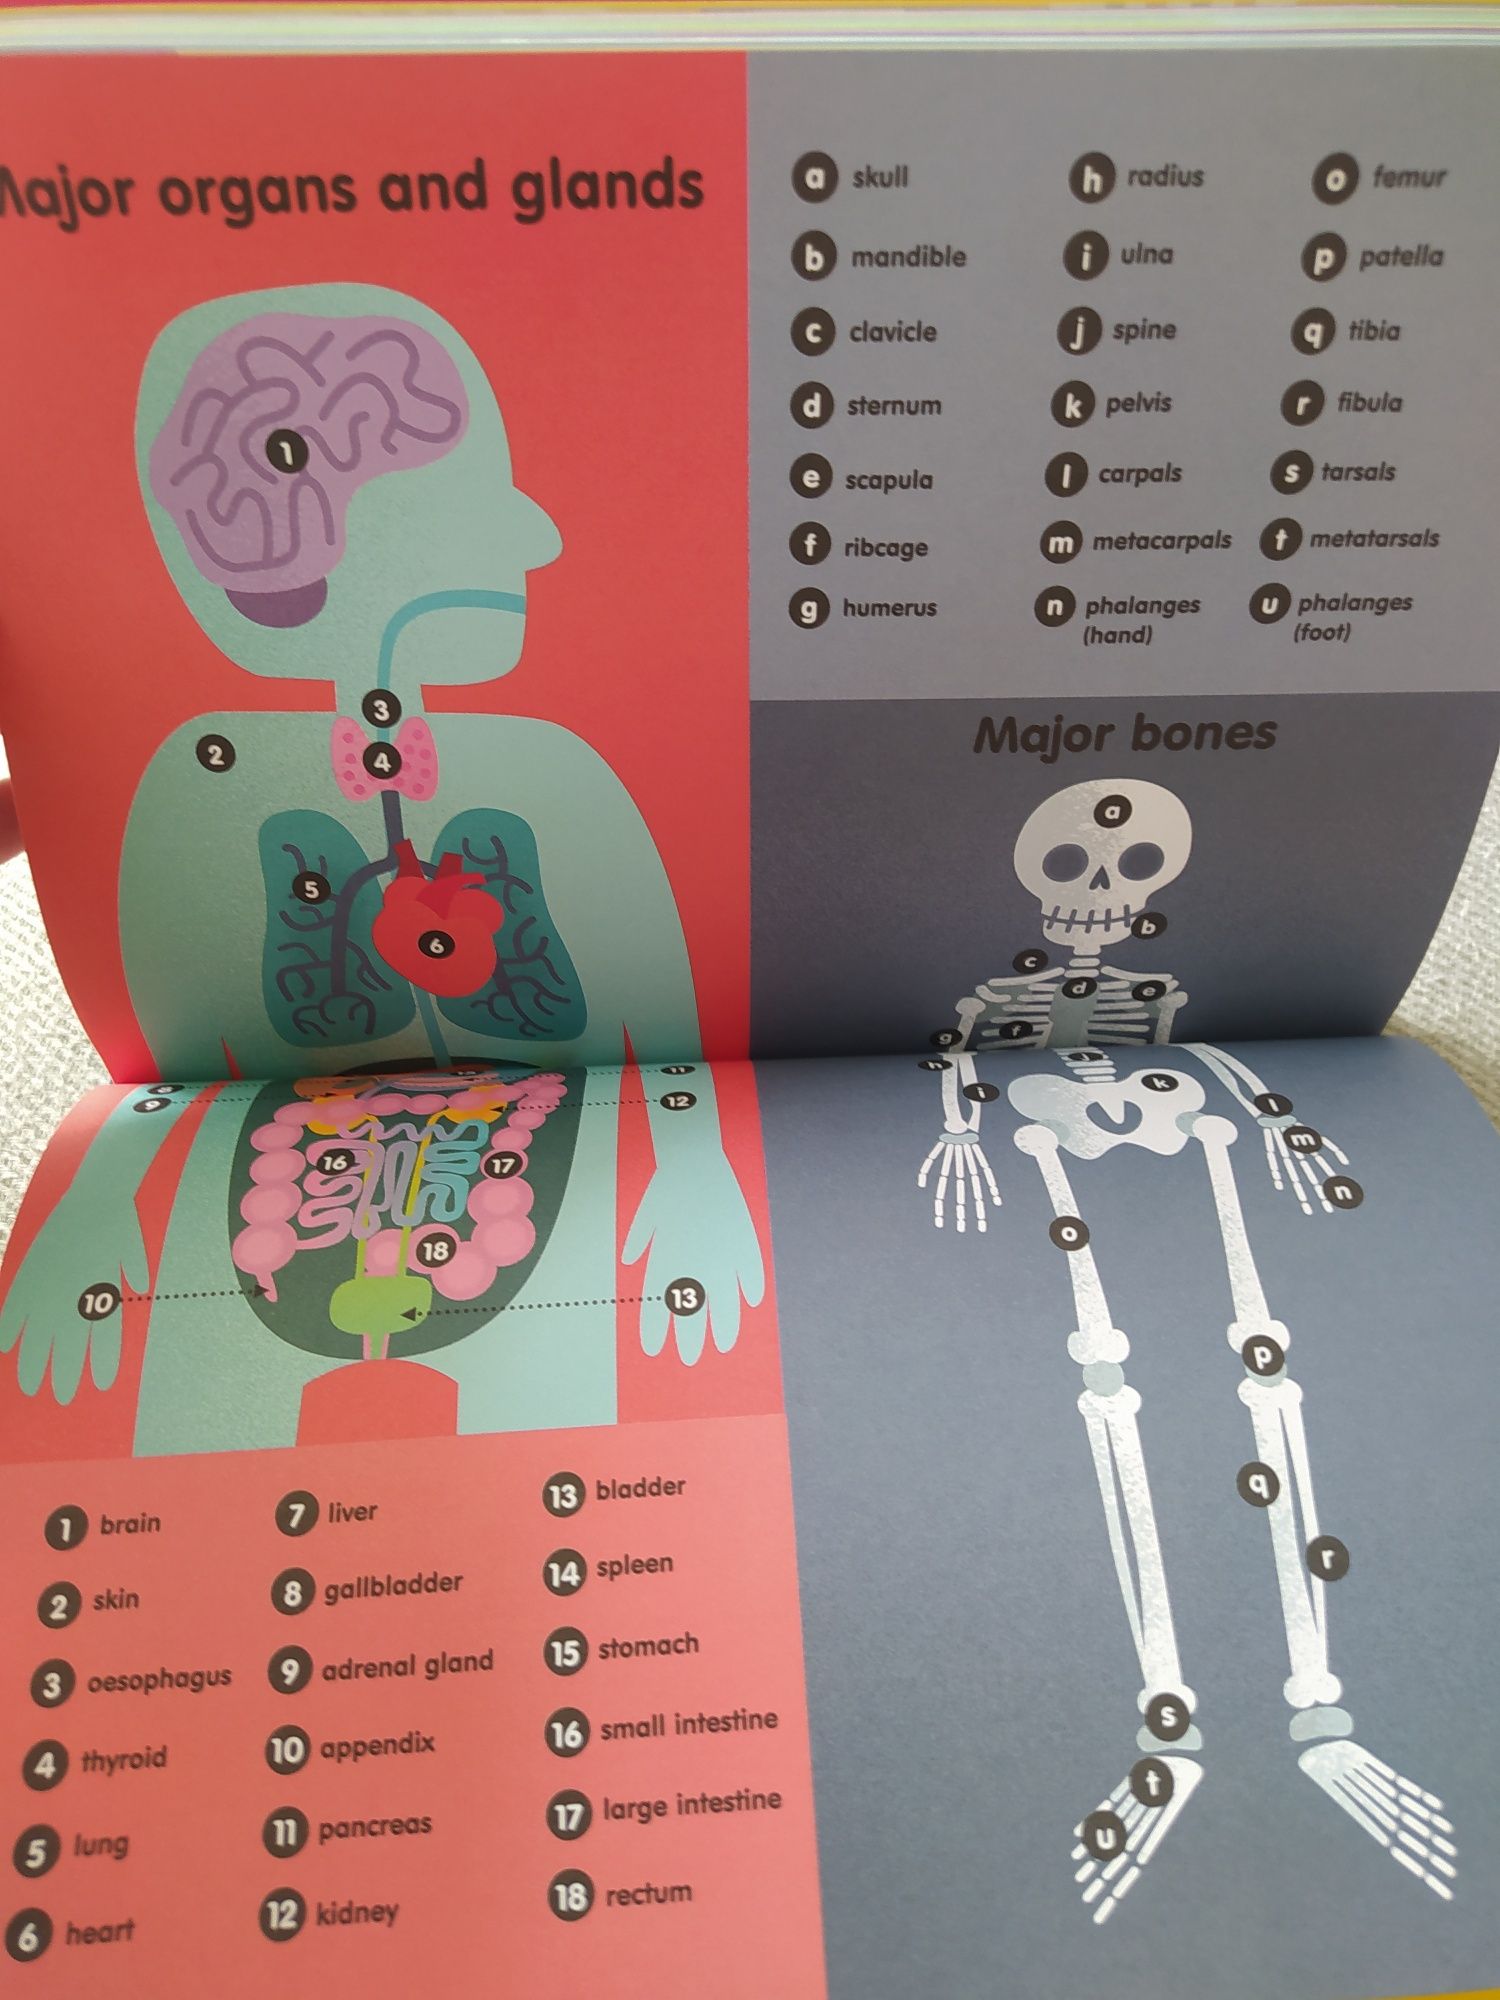 100 things to know about the human body książka angielski English book